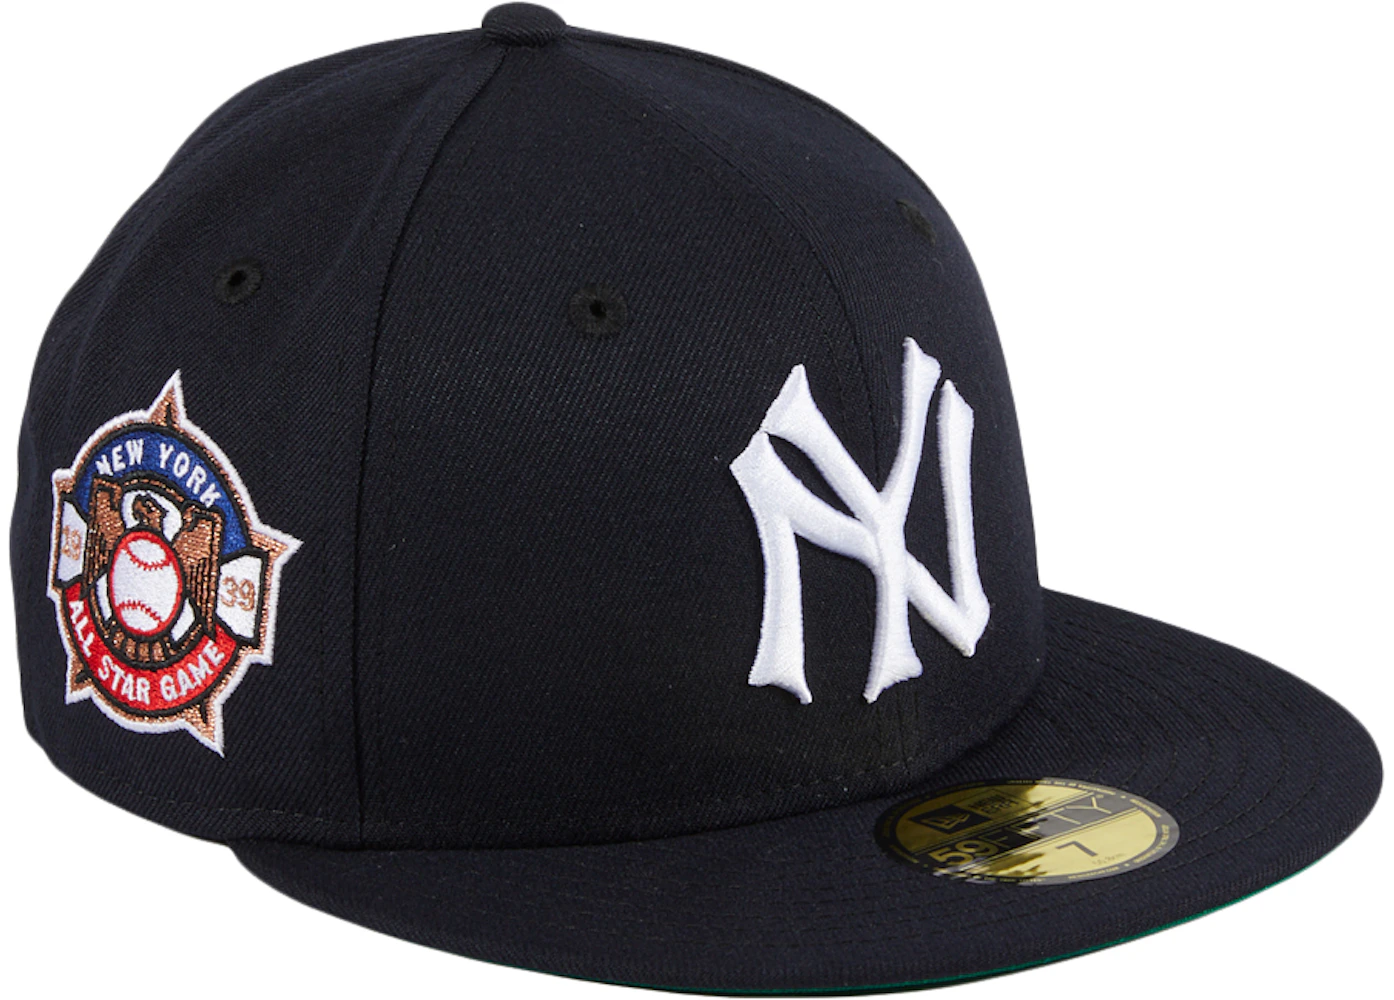 New Era 9Forty The League Game Cap - New York Yankees/Navy - New Star